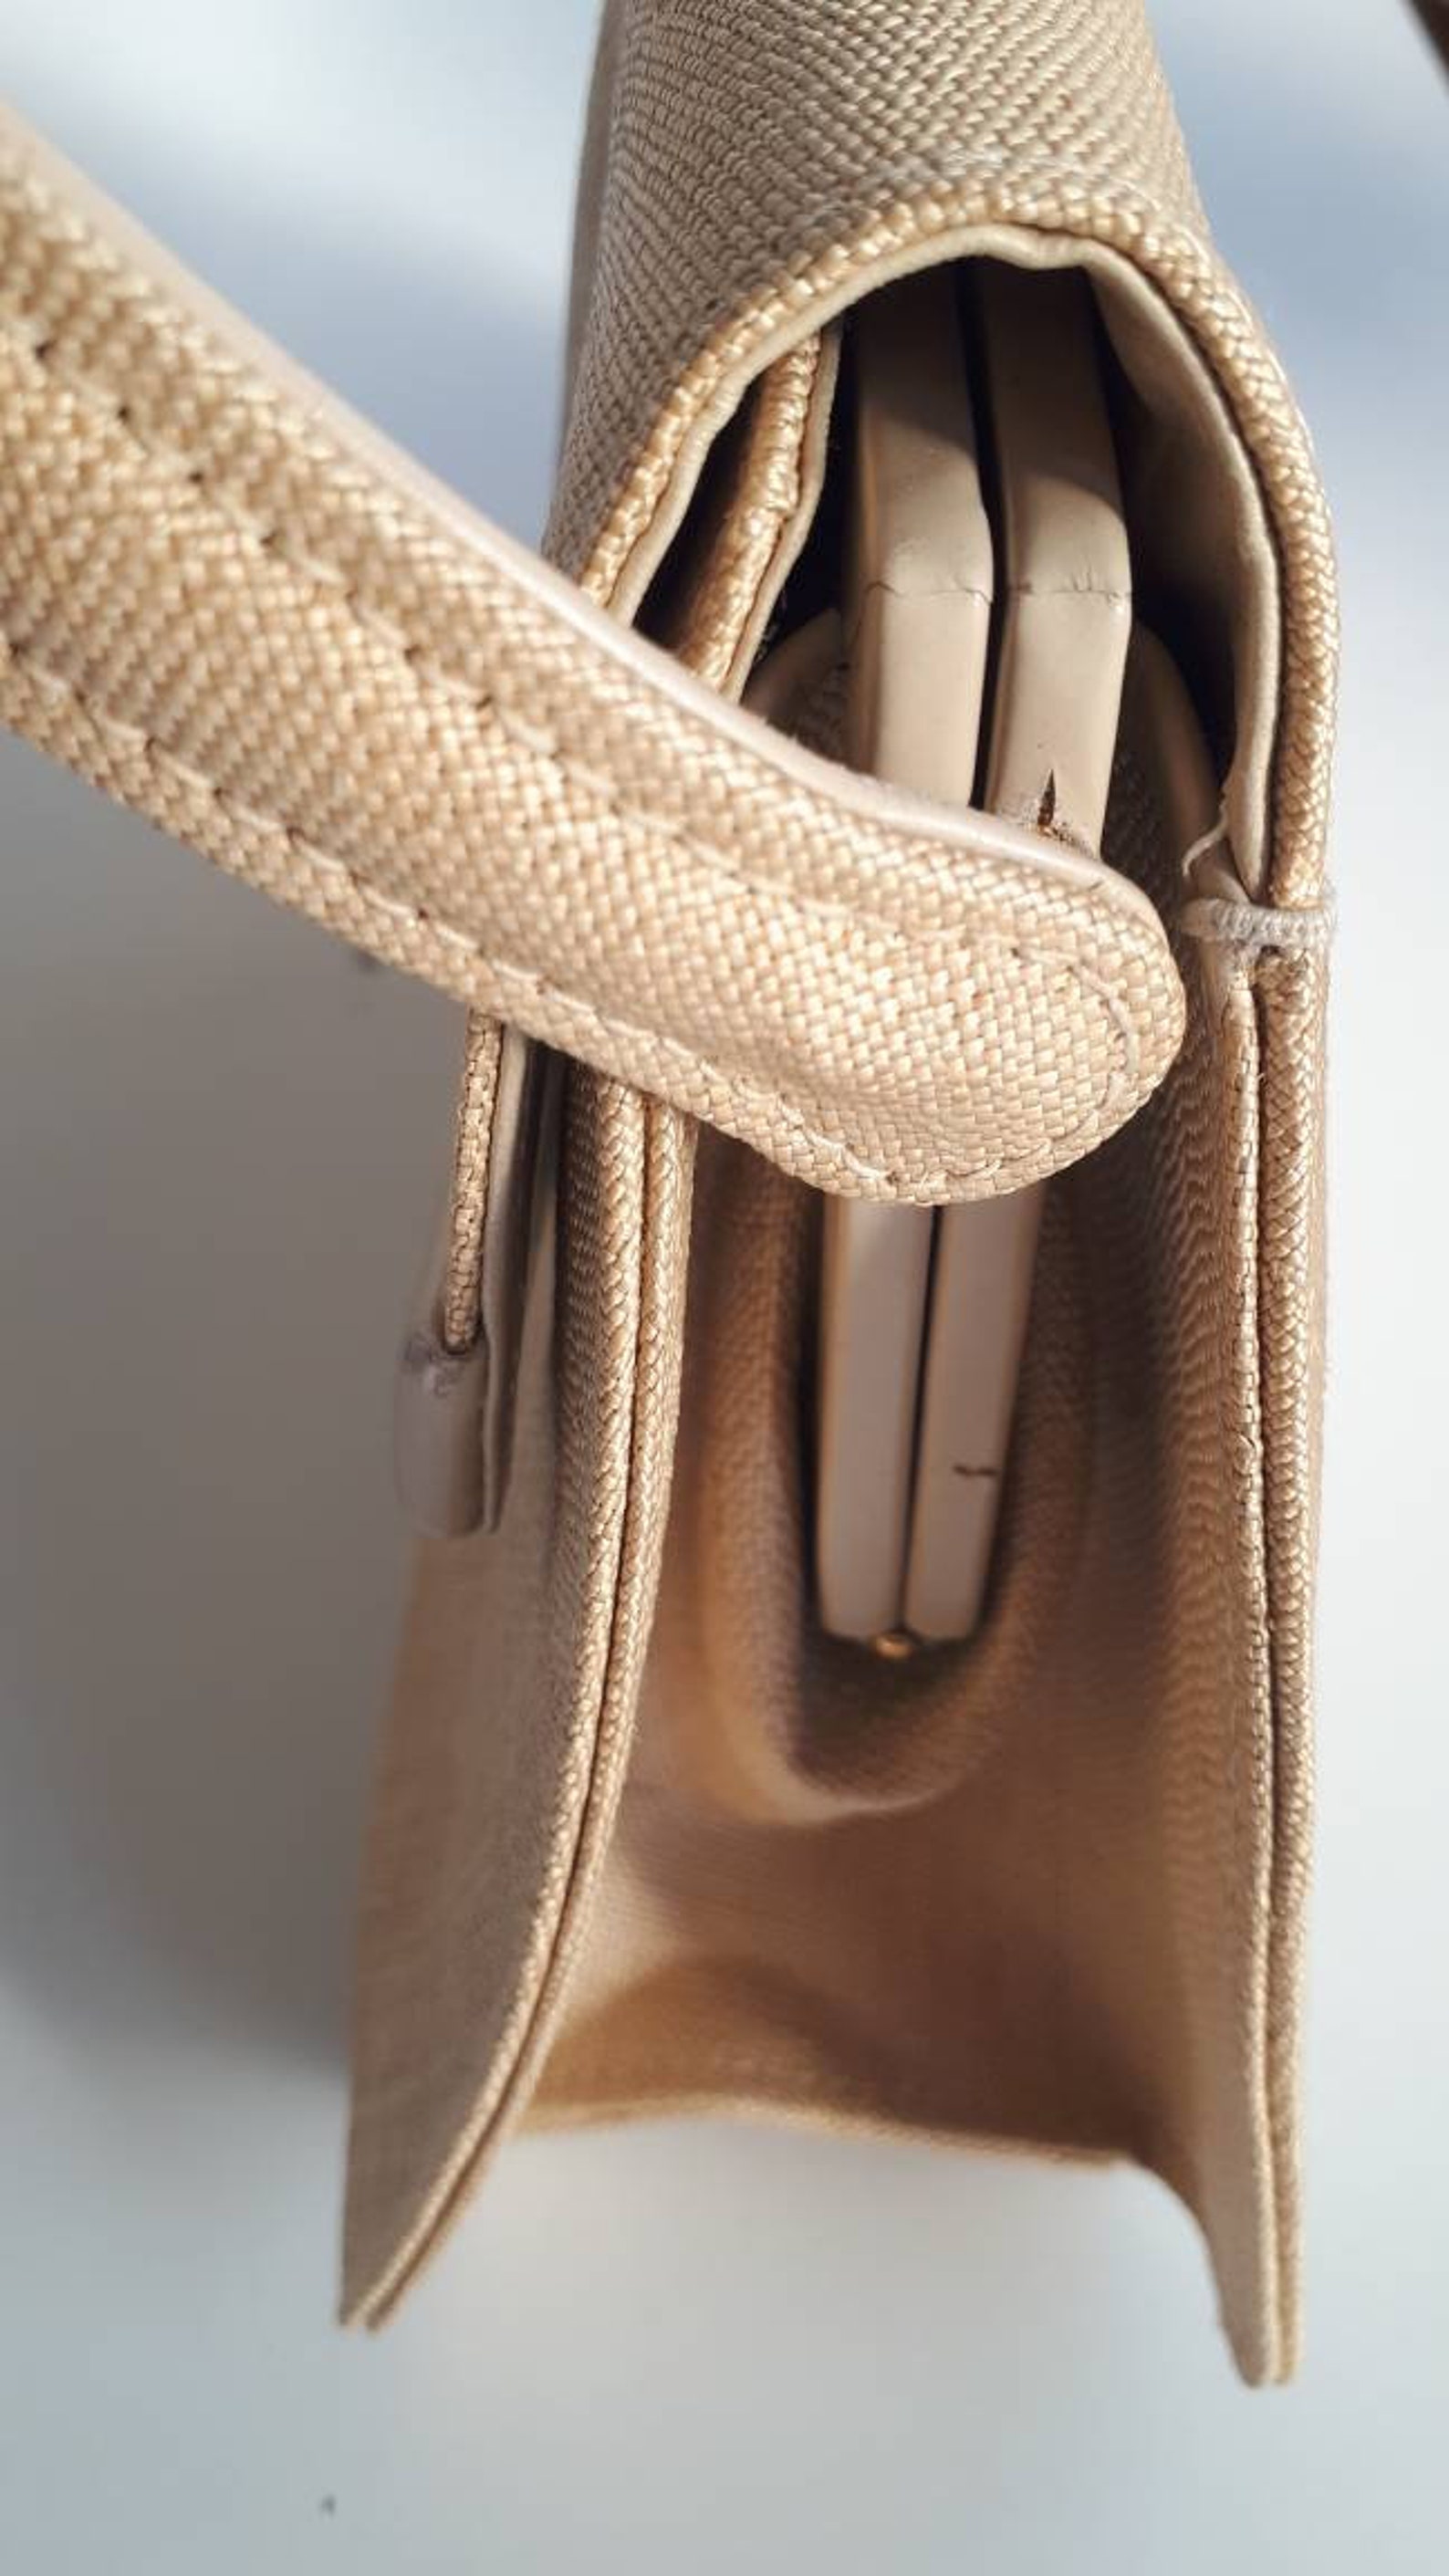 Bag Germaine Guérin 50s fine straw and leather bag delivered | Etsy